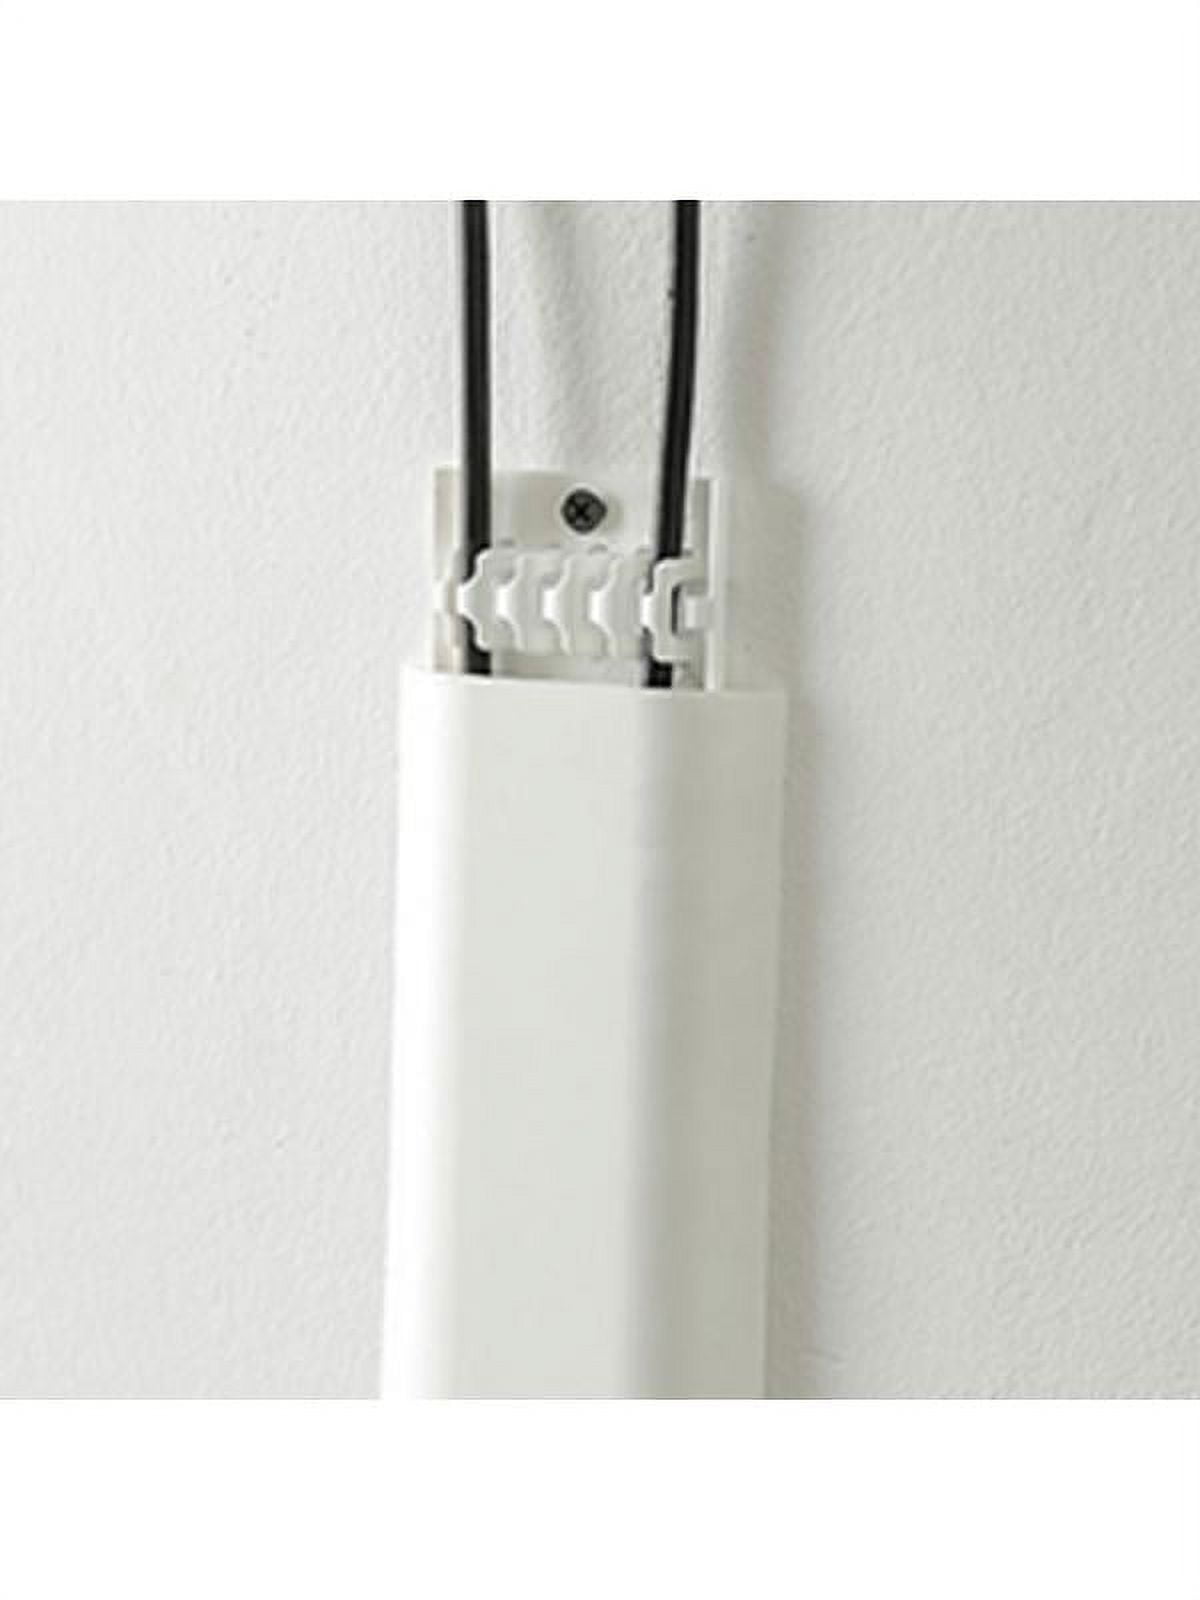 TV Cord Cover, 36 inch Cable Concealer for Wall Mount TV System, Paintable  Cable Management Raceway to Hide Wires, W1.6 x H0.8,White